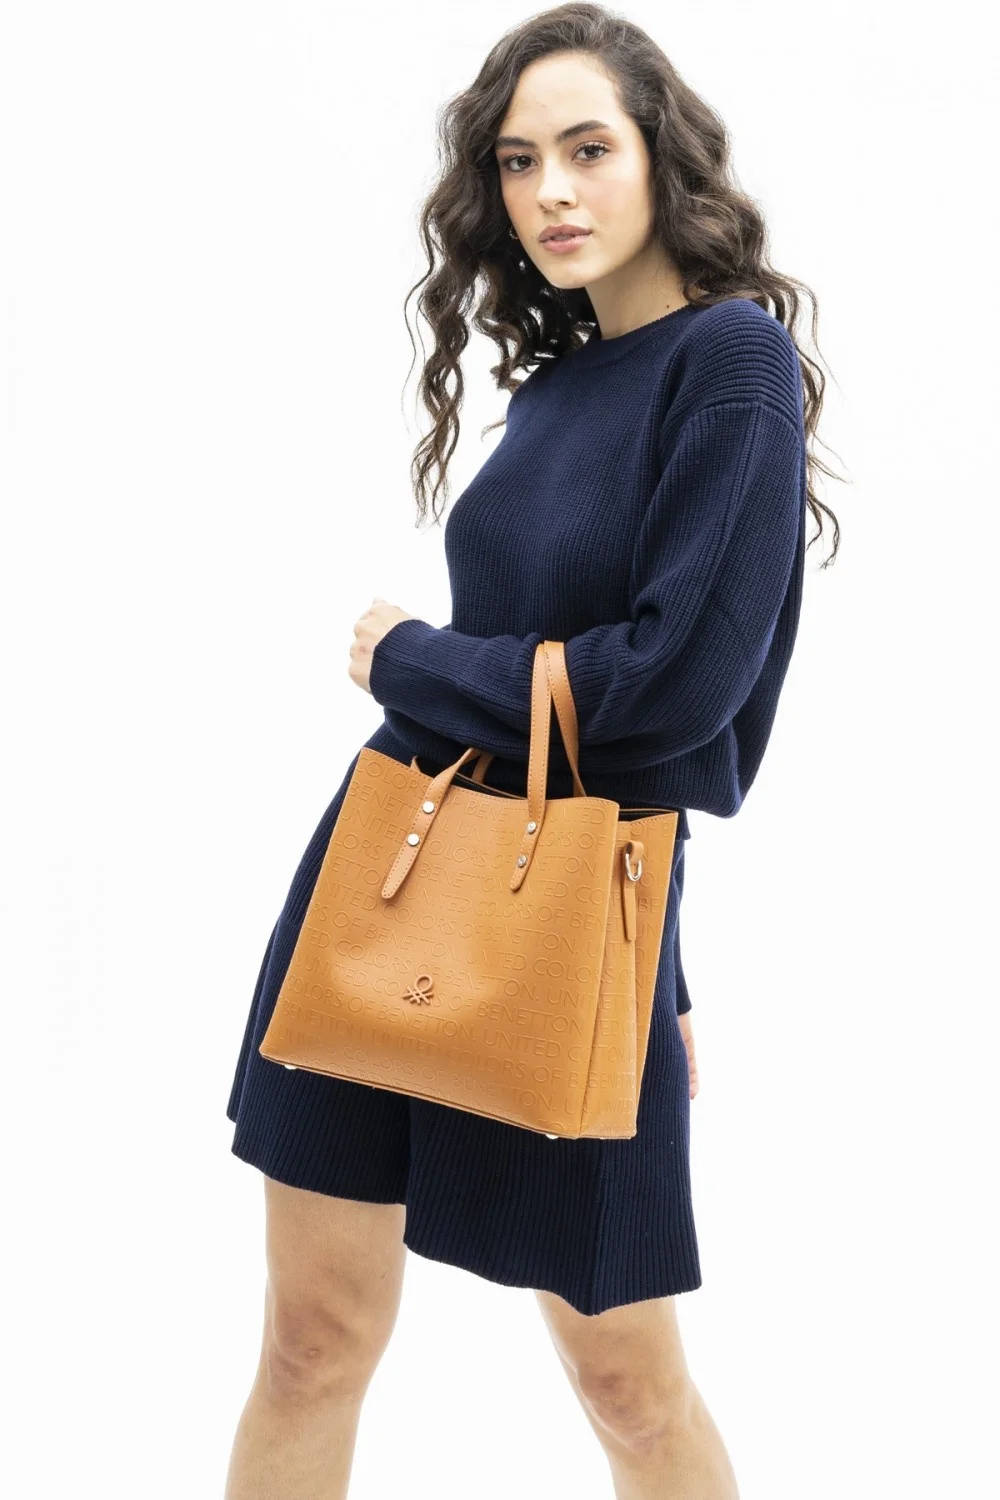 

United Colors of Benetton BNT_600 CAMEL Bag